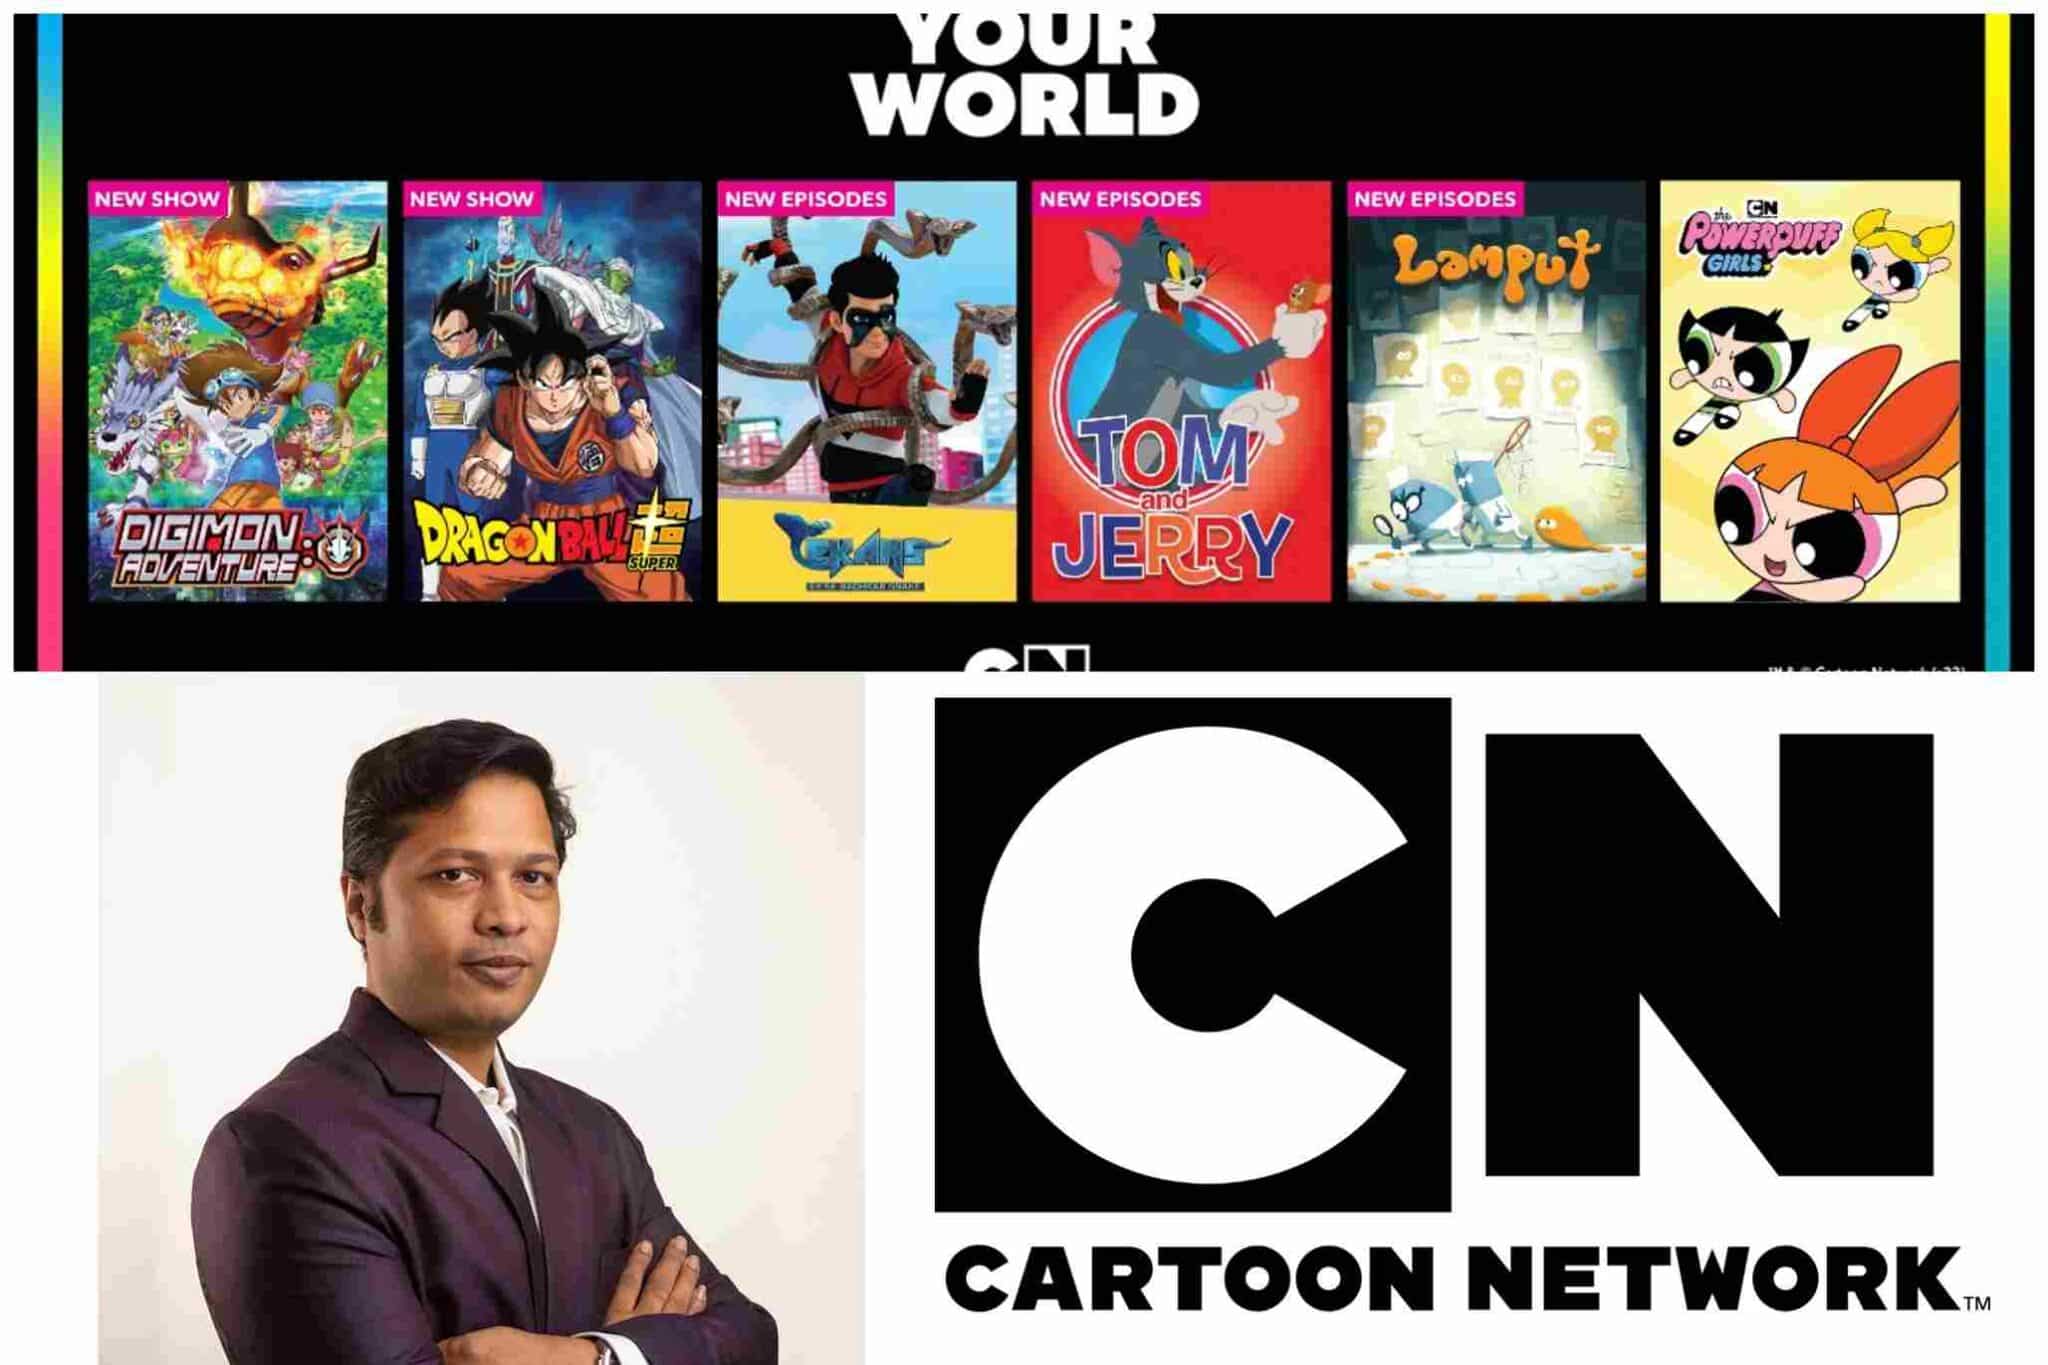 CARTOON NETWORK CELEBRATES EVERY KID'S UNIQUENESS WITH ITS NEW BRAND  CAMPAIGN 'REDRAW YOUR WORLD'